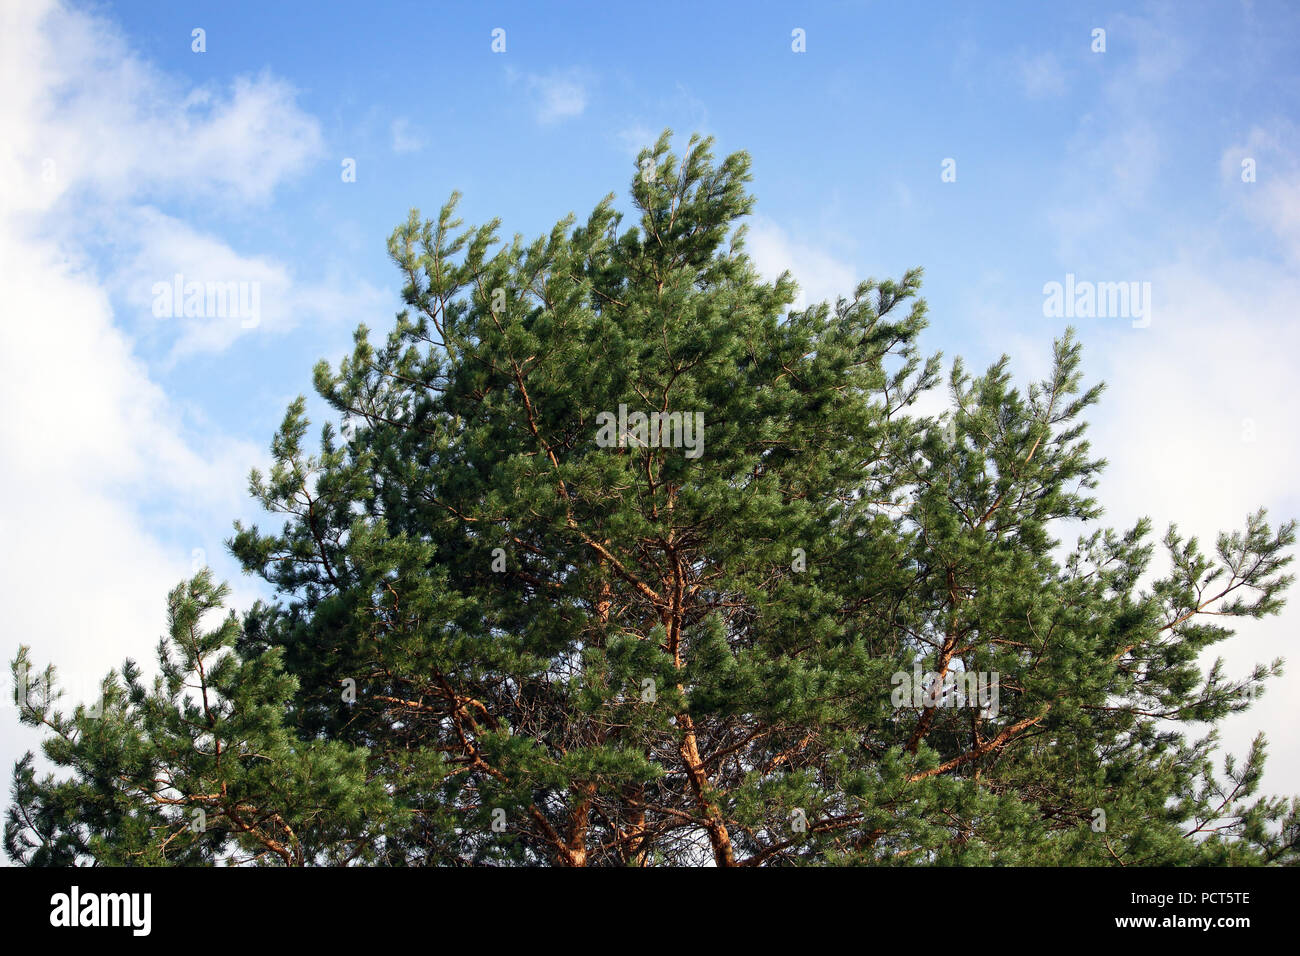 Green crown of the pine over the blue sky photo Stock Photo